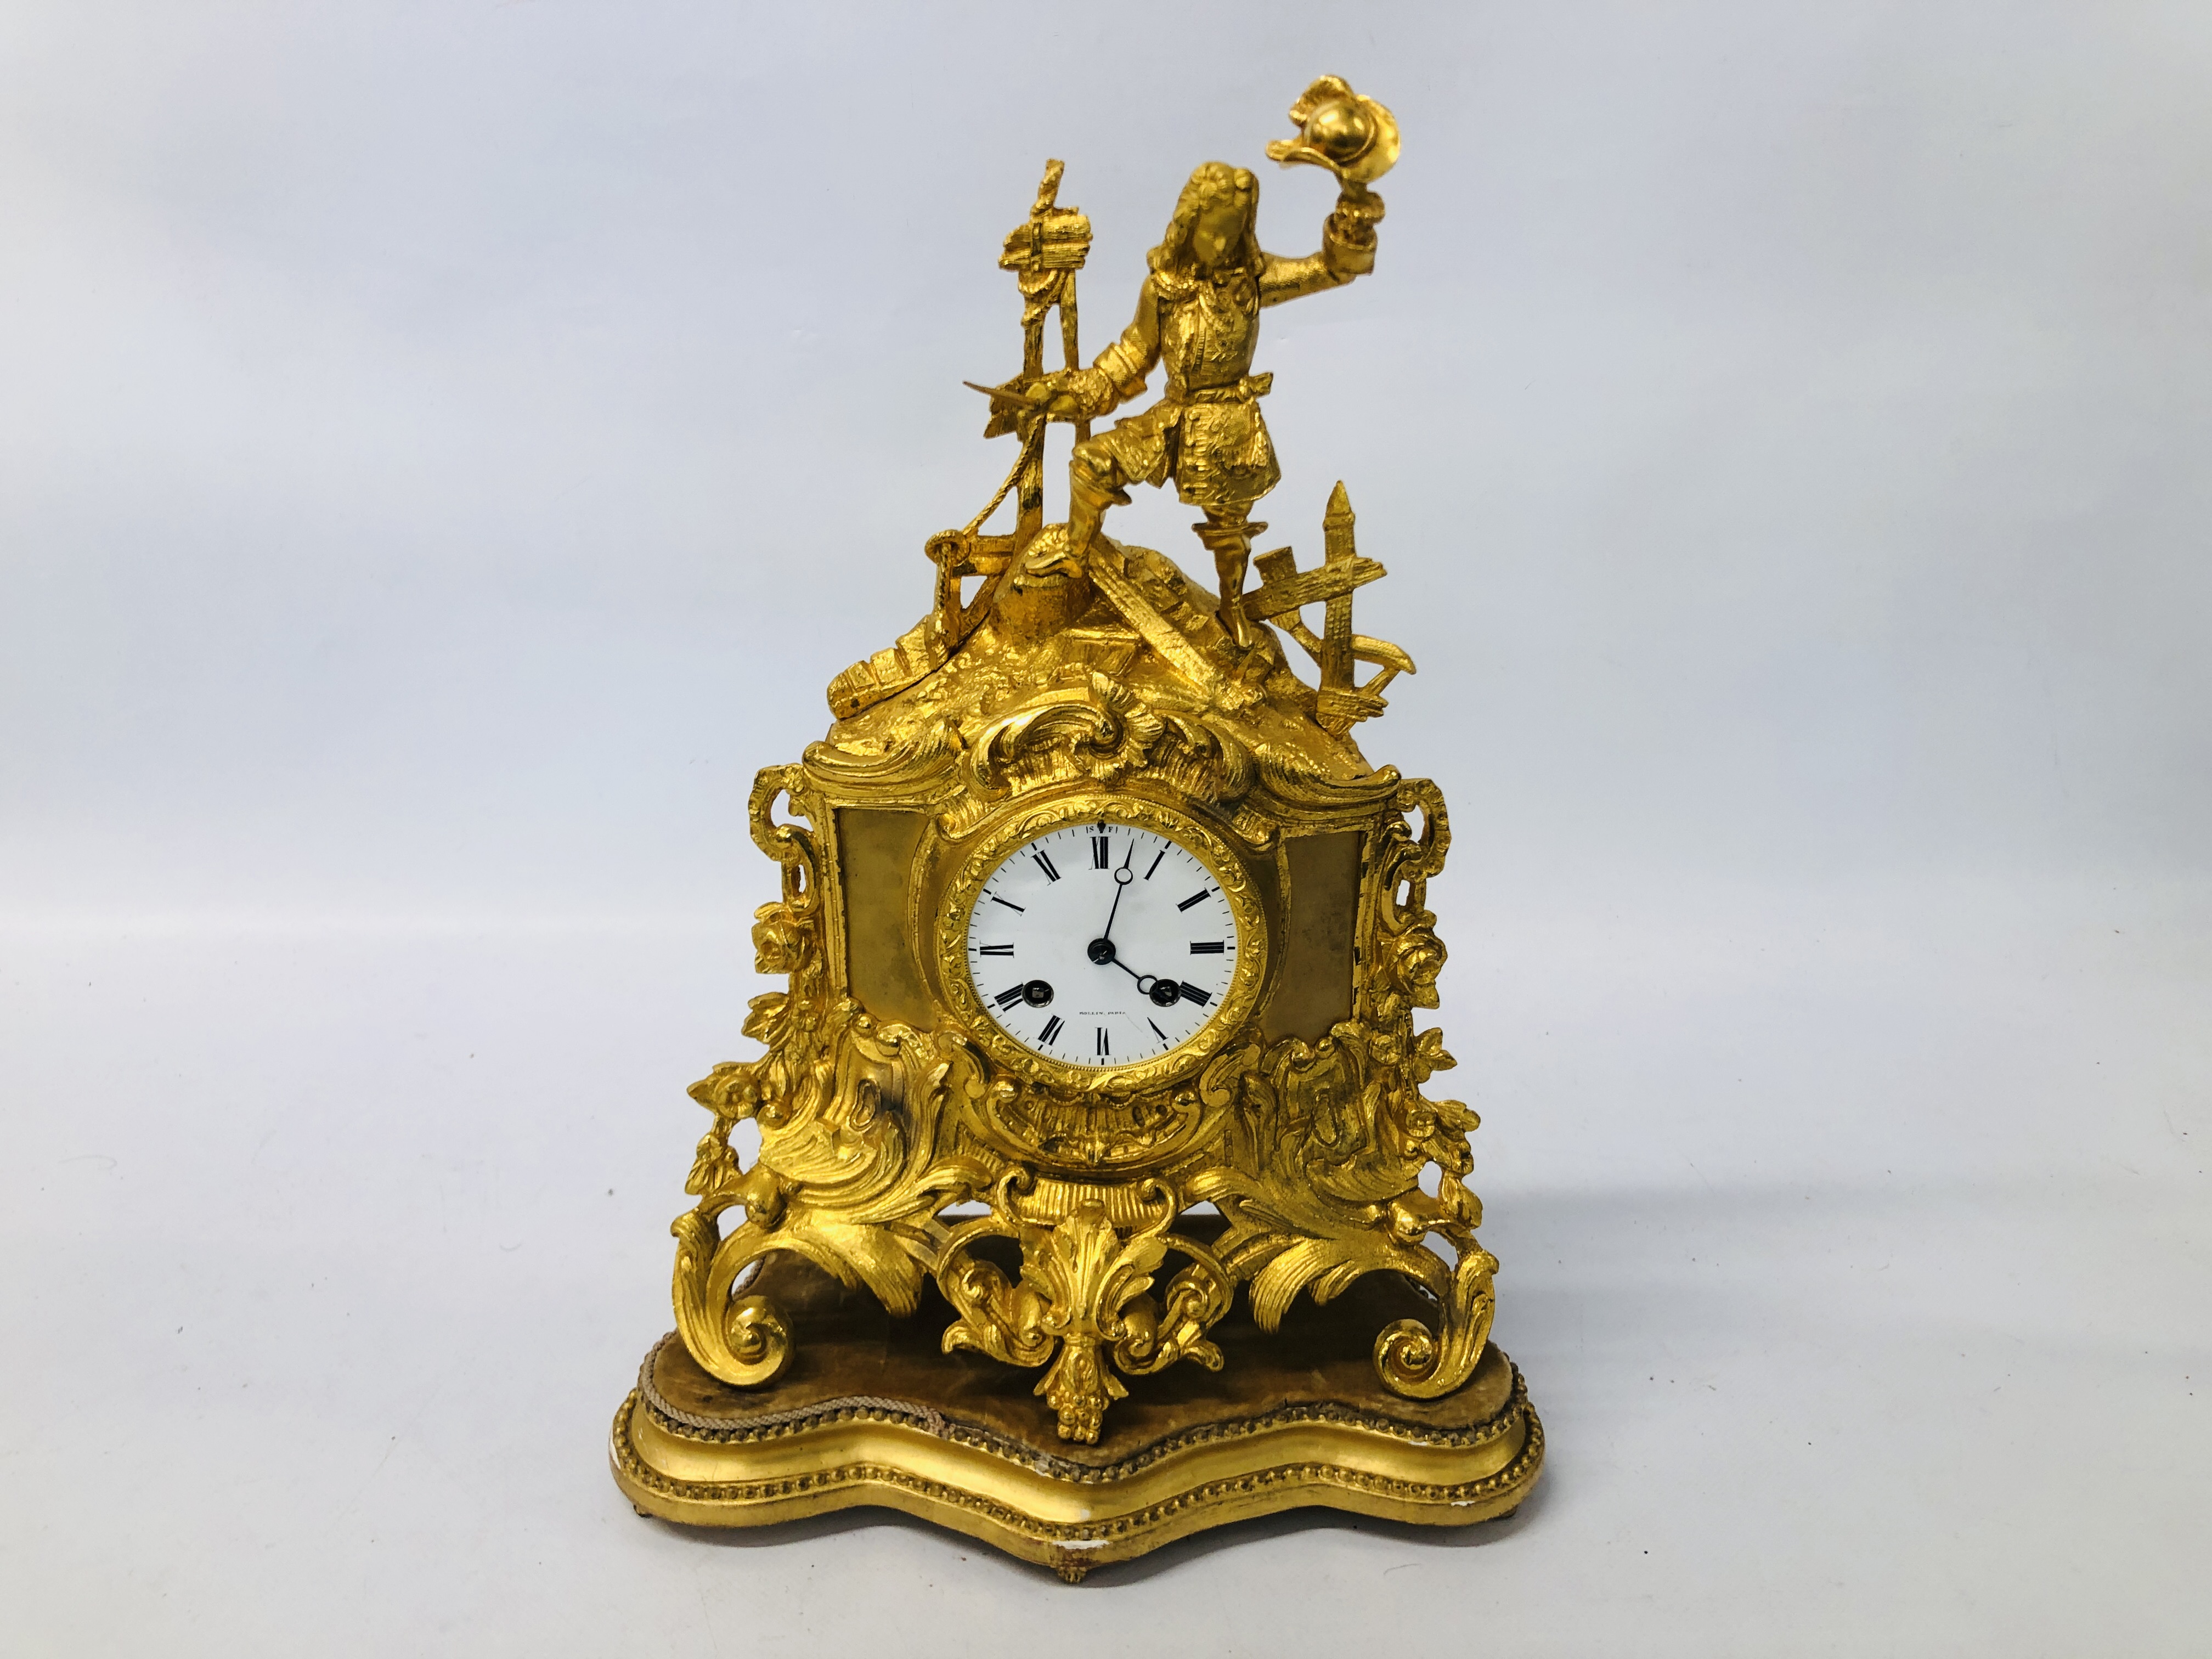 C19TH FRENCH ORMOLU CLOCK MARKED "ROLLIN" PARIS WITH GLASS DOME - Image 2 of 9